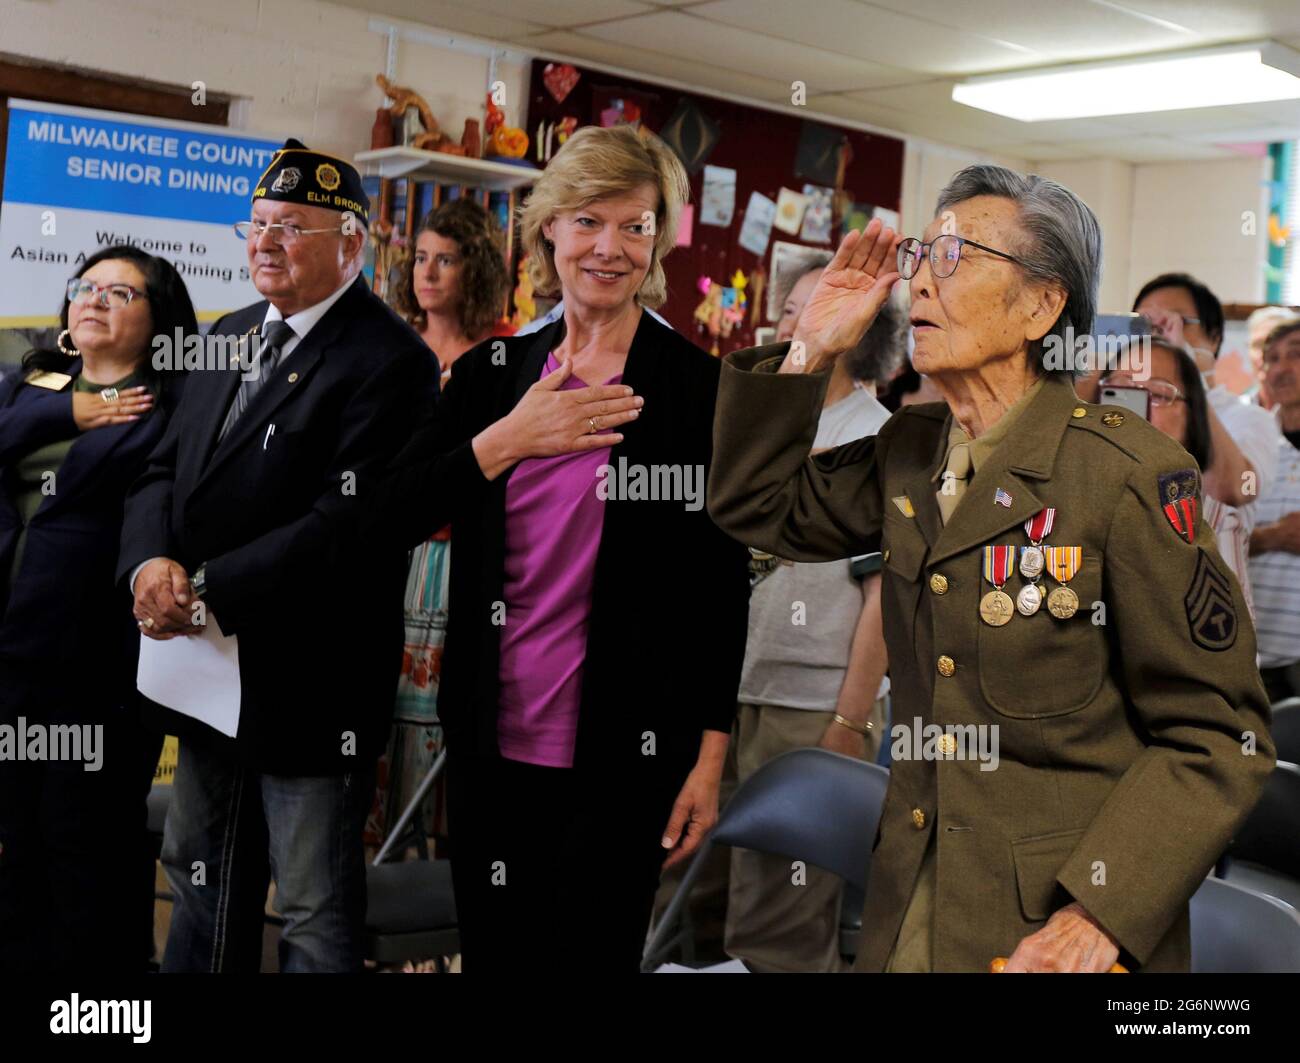 July 7, 2021, Milwaukee, Wisconsin, U.S: DR. DAVID TOY (right to left), U.S. SENATOR TAMMY BALDWIN, ALEX KOLANDER, Commander of American Legion Post 449, and regional representative to Baldwin, VANESSA L. LLANAS stand as they recited the Pledge of Allegiance during opening ceremony. U.S. Senator Tammy Baldwin, the Organization of Chinese Americans-Wisconsin Chapter and the Chinese Golden Age Club of Milwaukee honored.DR. DAVID TOY, 97, Wednesday July 7, 2021, as he receives the Chinese-American World War II Veteran Service Medal at the Chinese Community Baptist Church in Milwaukee. DR. DAVID Stock Photo